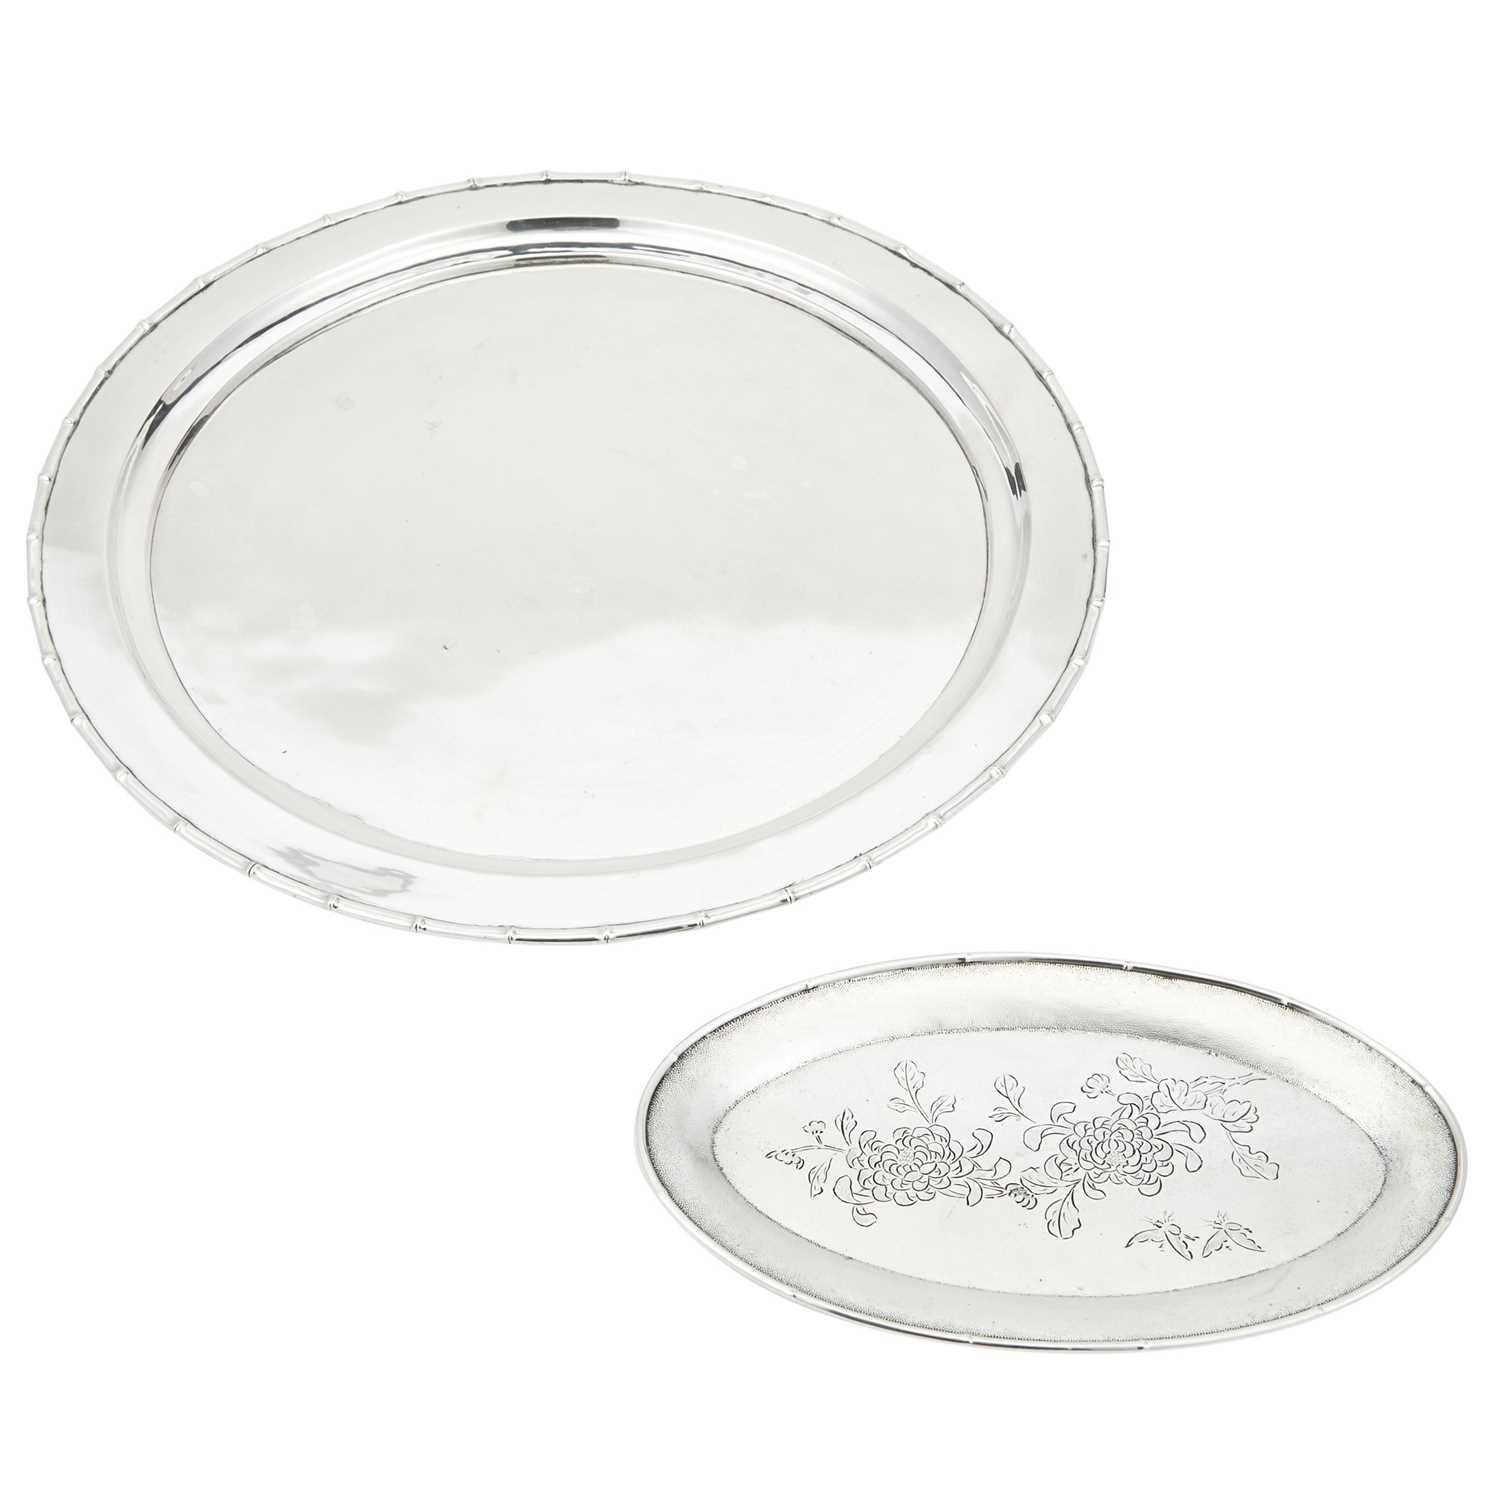 Lot 121 - Chinese Export Silver Tray